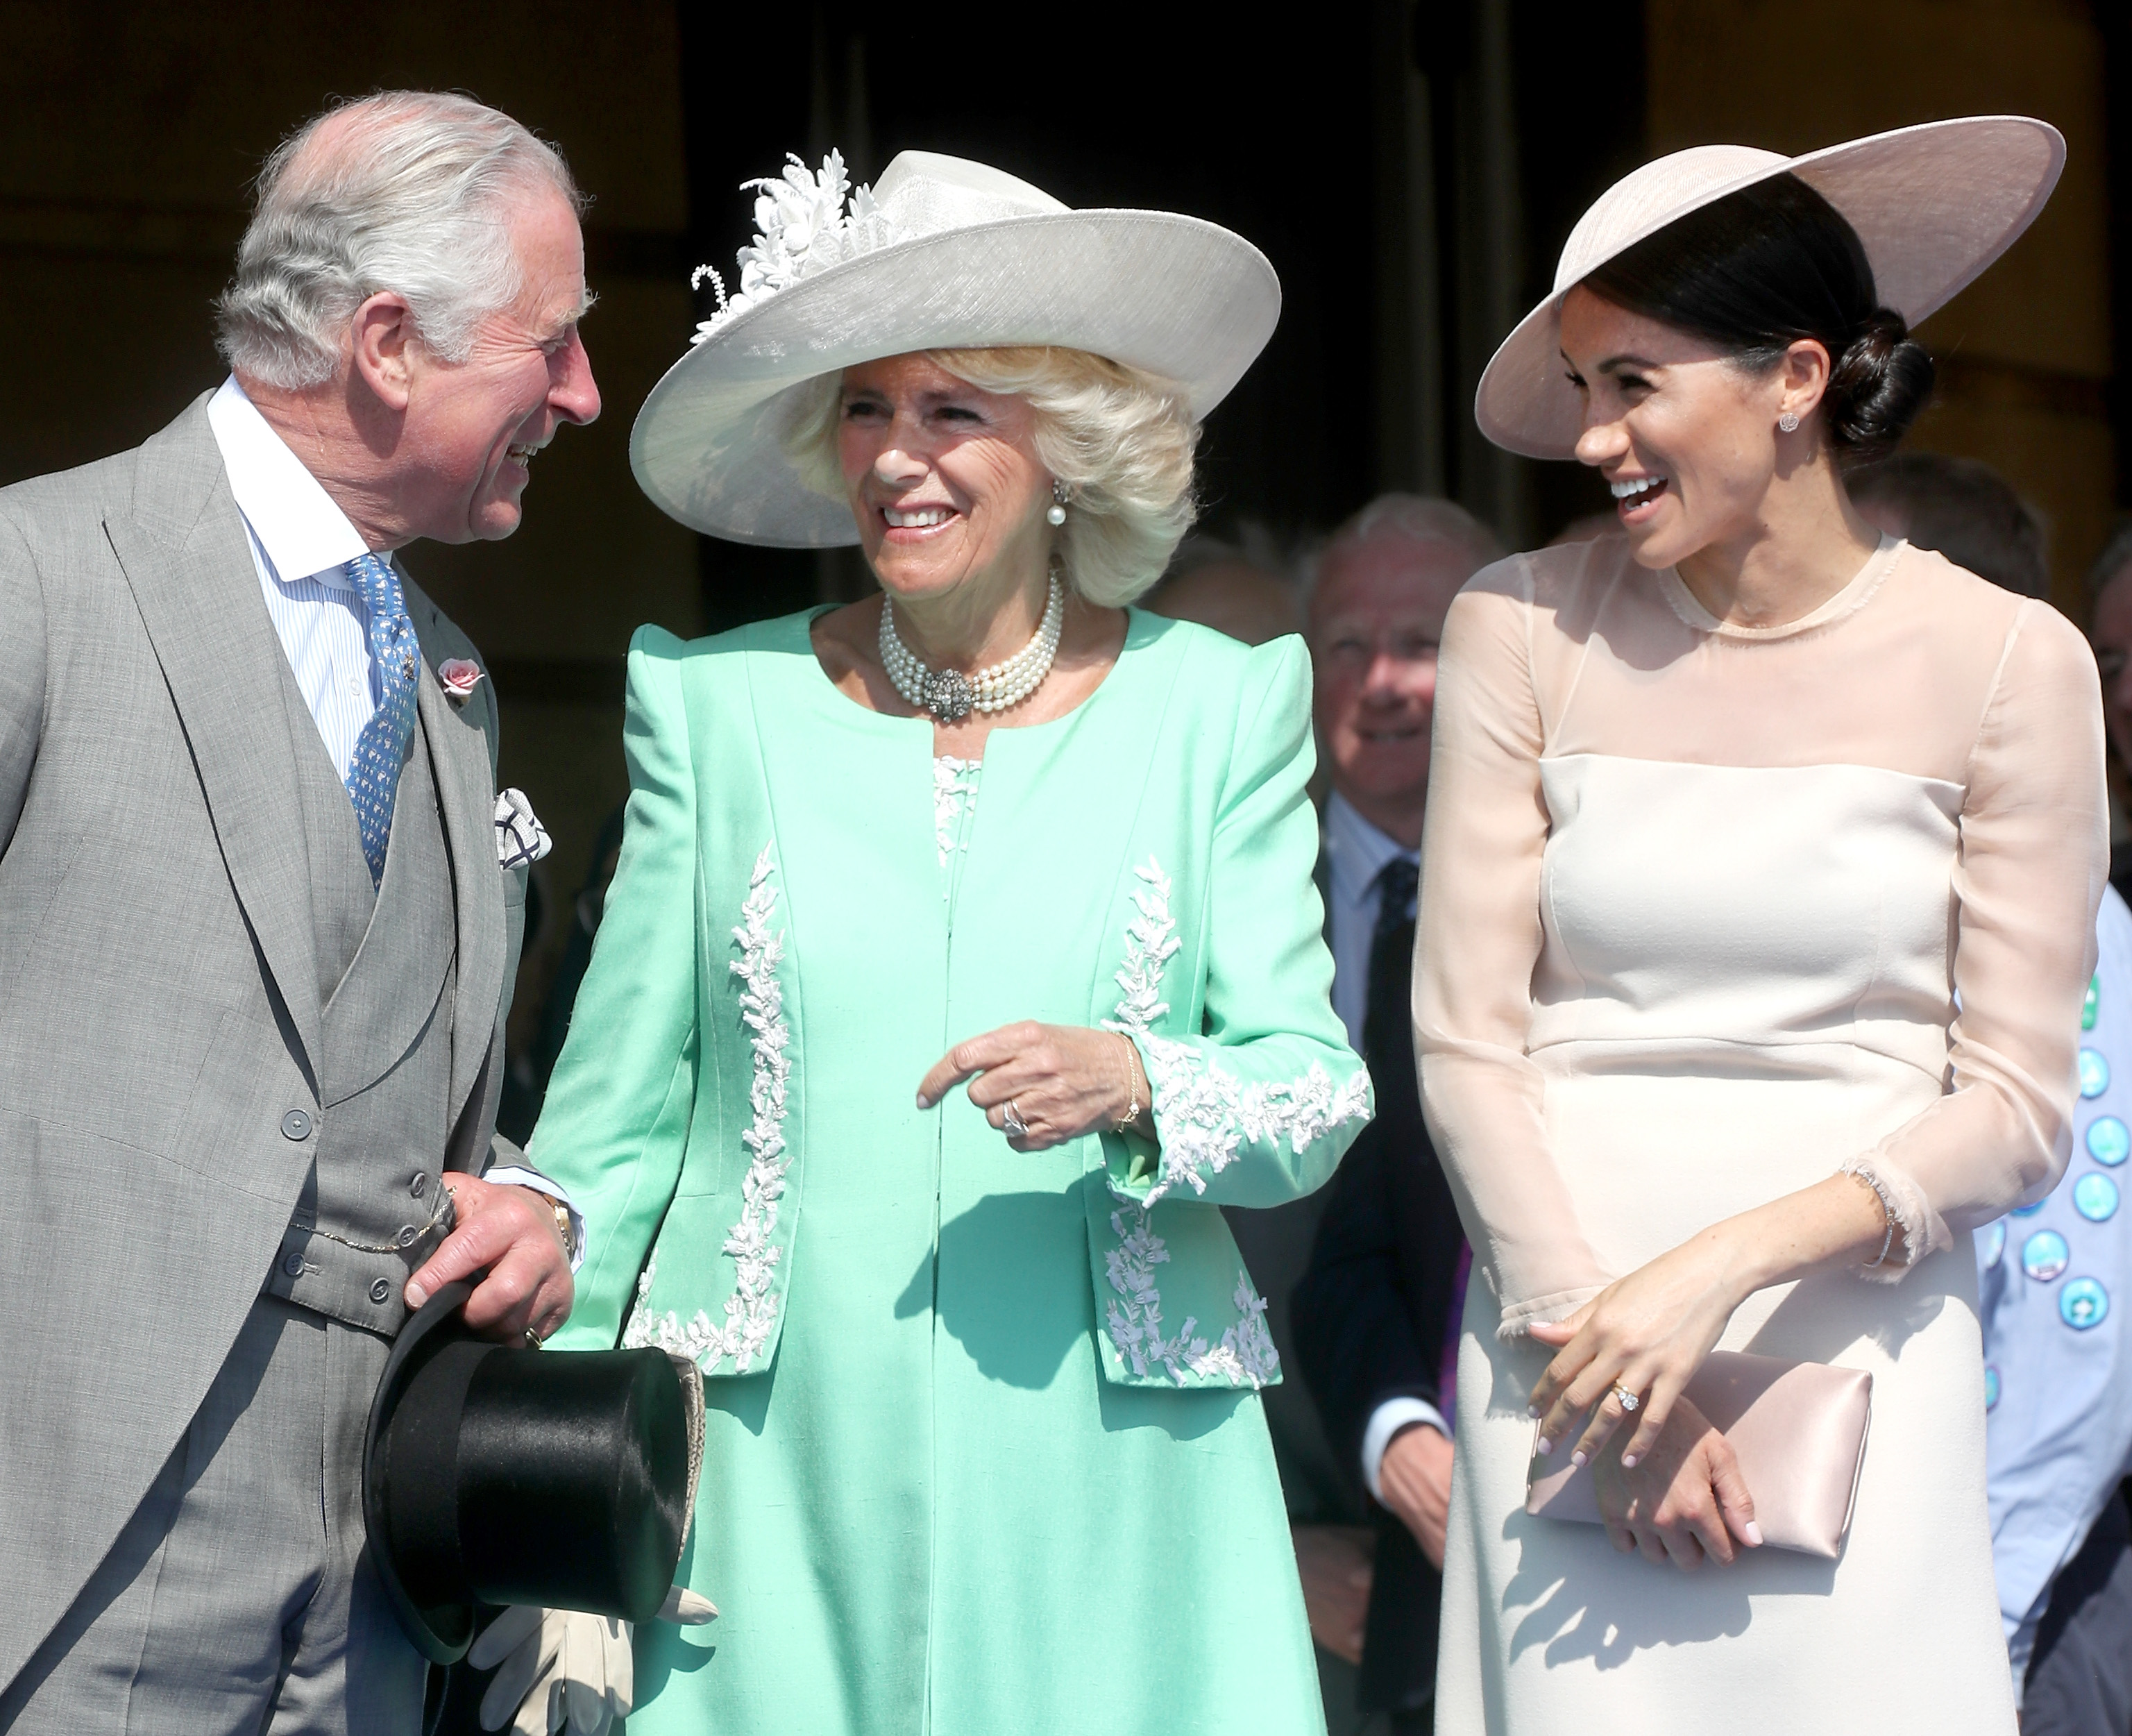 Prince Charles, Camilla Parker Bowles, and Meghan Markle laughing together during Charles' Birthday Patron celebration